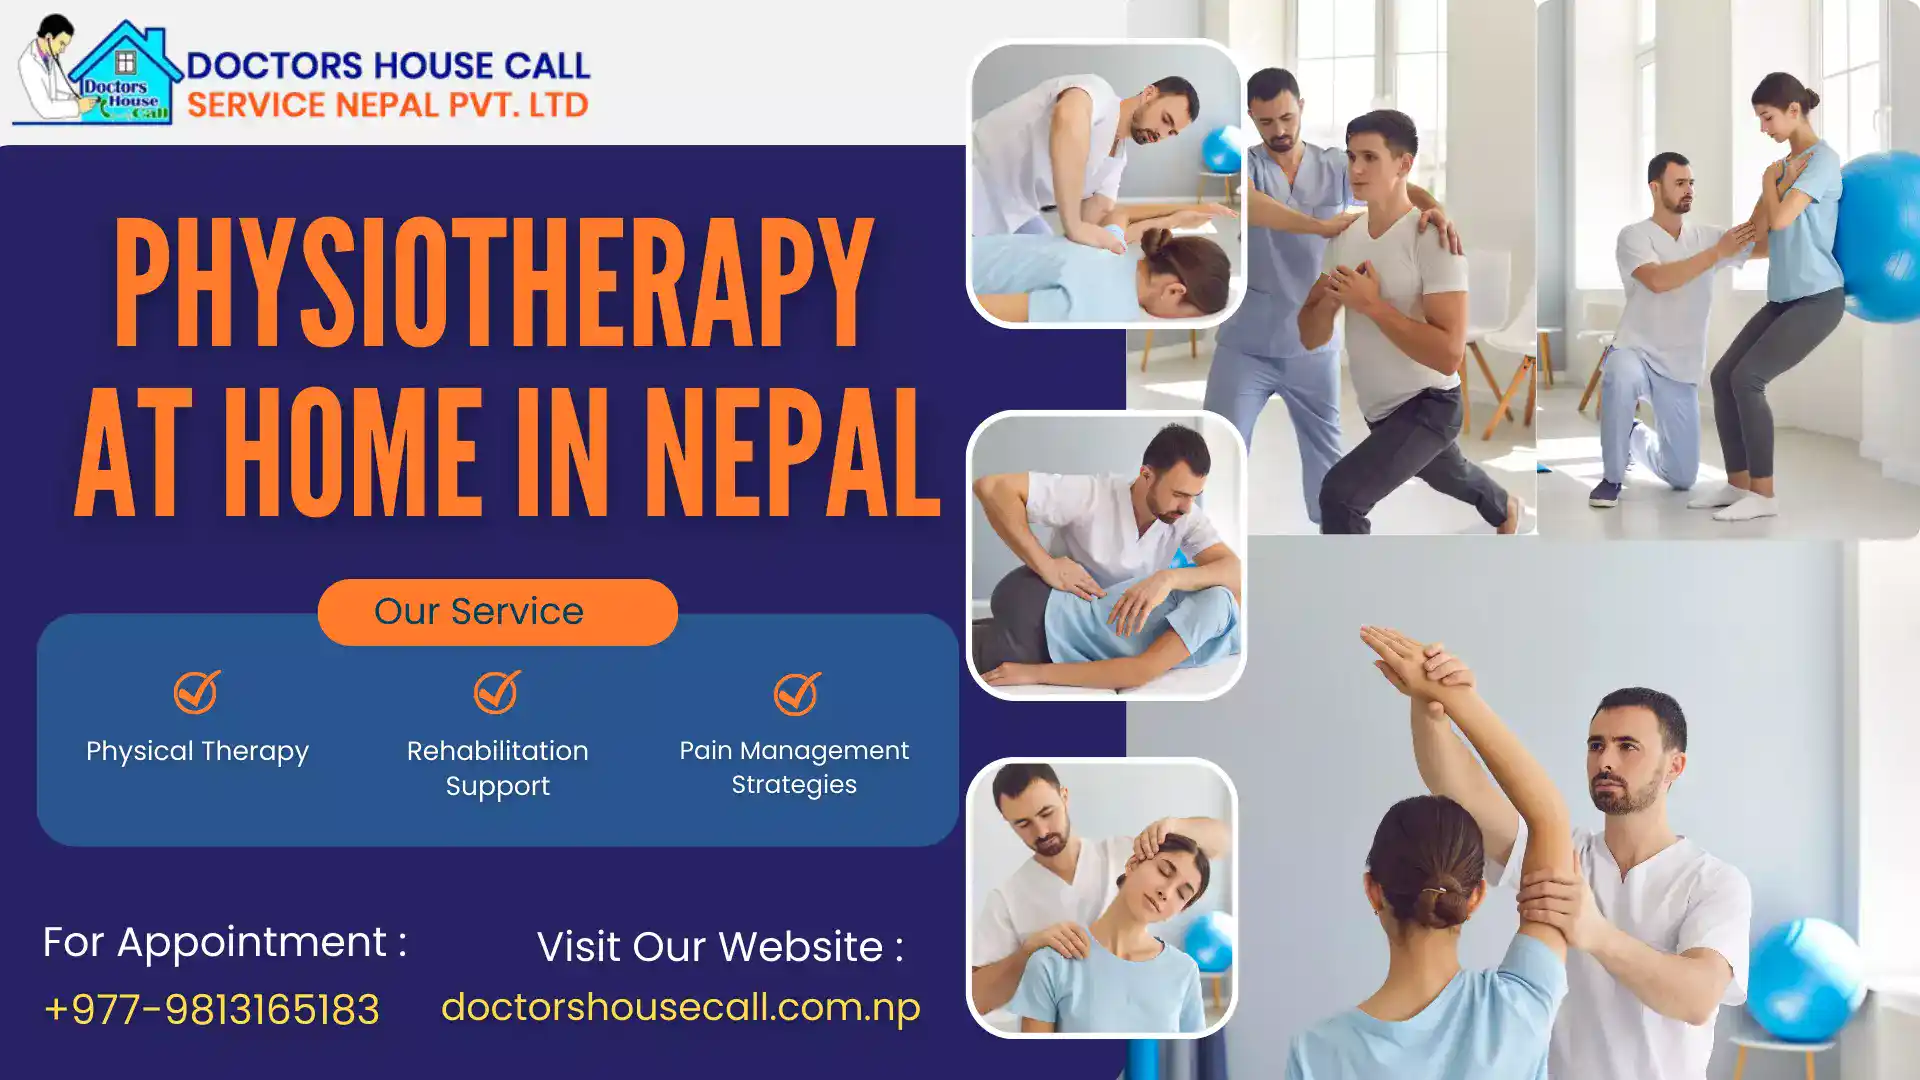 Best Physiotherapy at Home in Kathmandu, Nepal - Doctors House Call Service